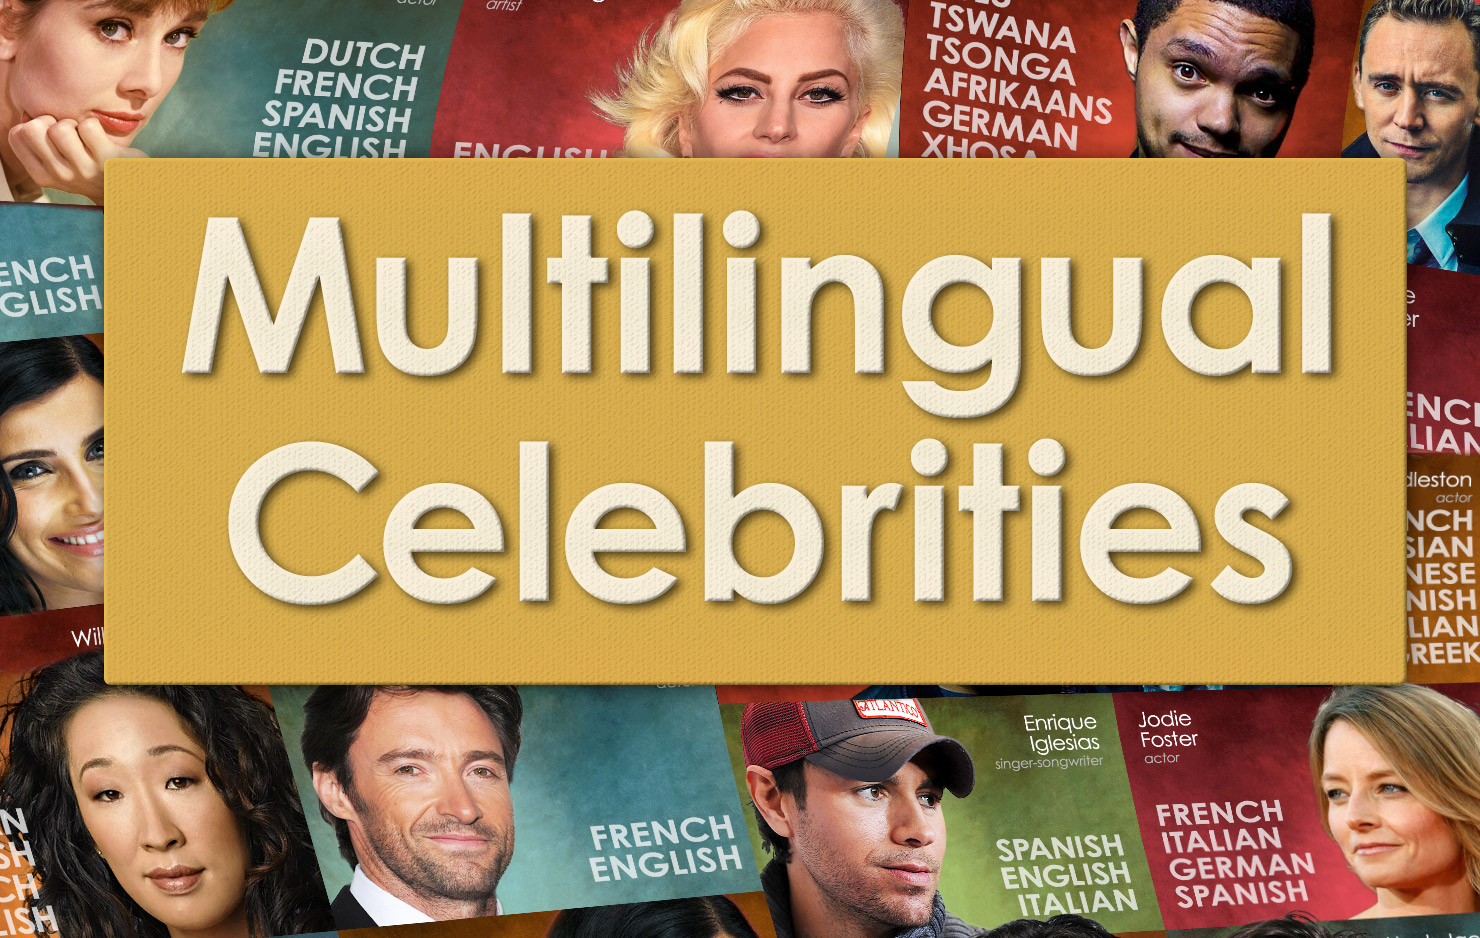 Wishing there were more? You might enjoy our celebrity page!